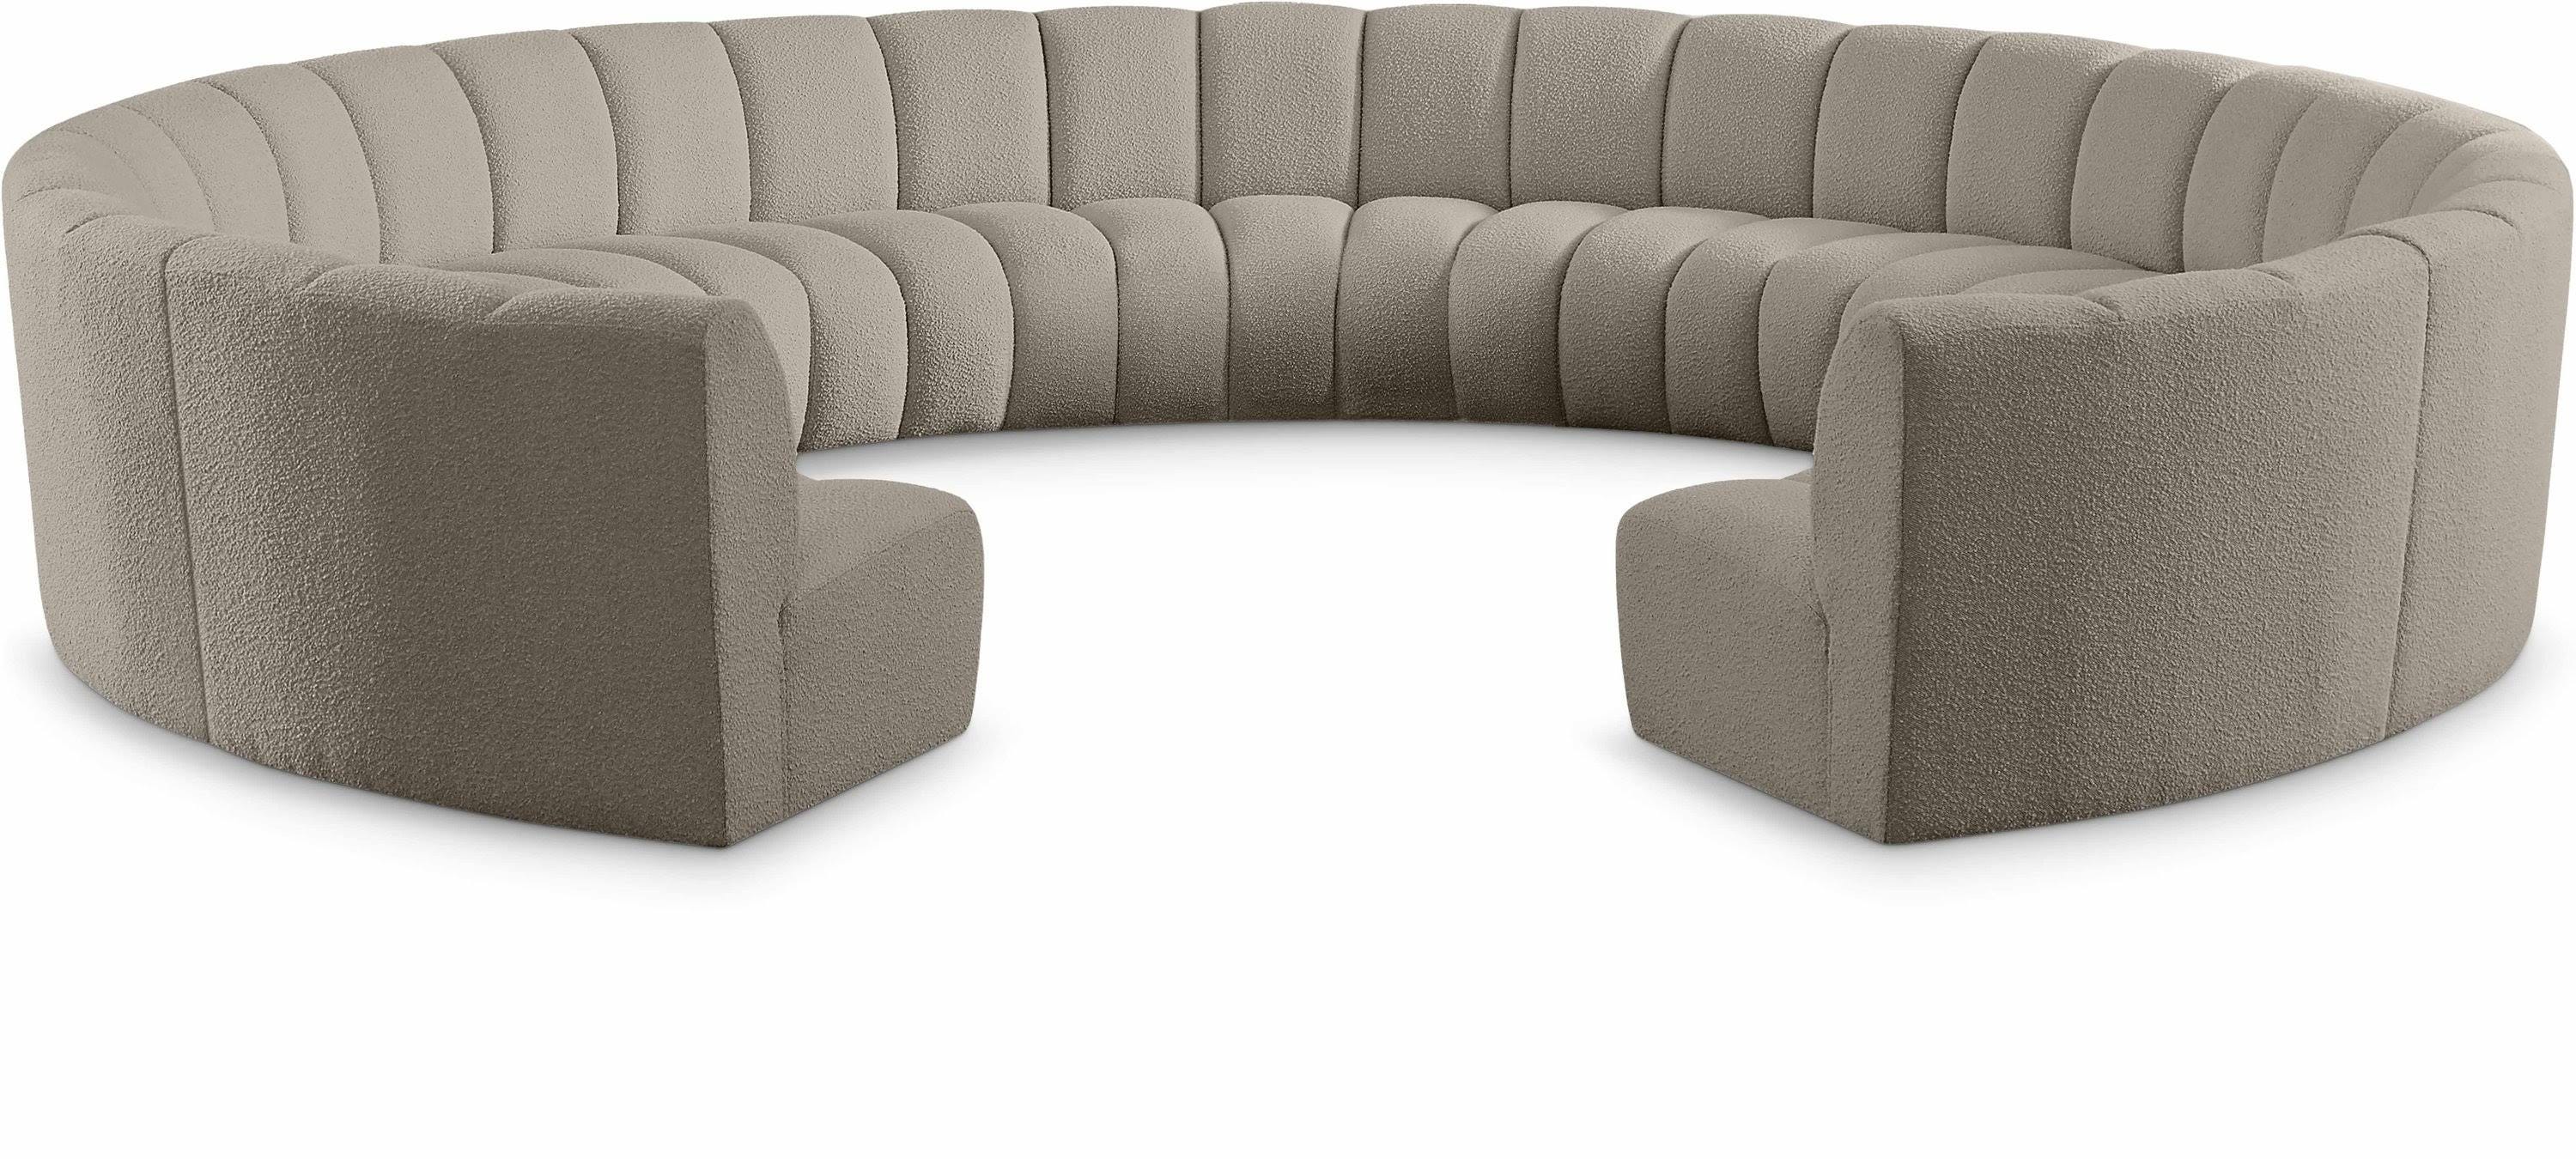 Meridian Furniture: Infinity Brown Microfiber Sectional with 11 Piece Modular Configuration | Image